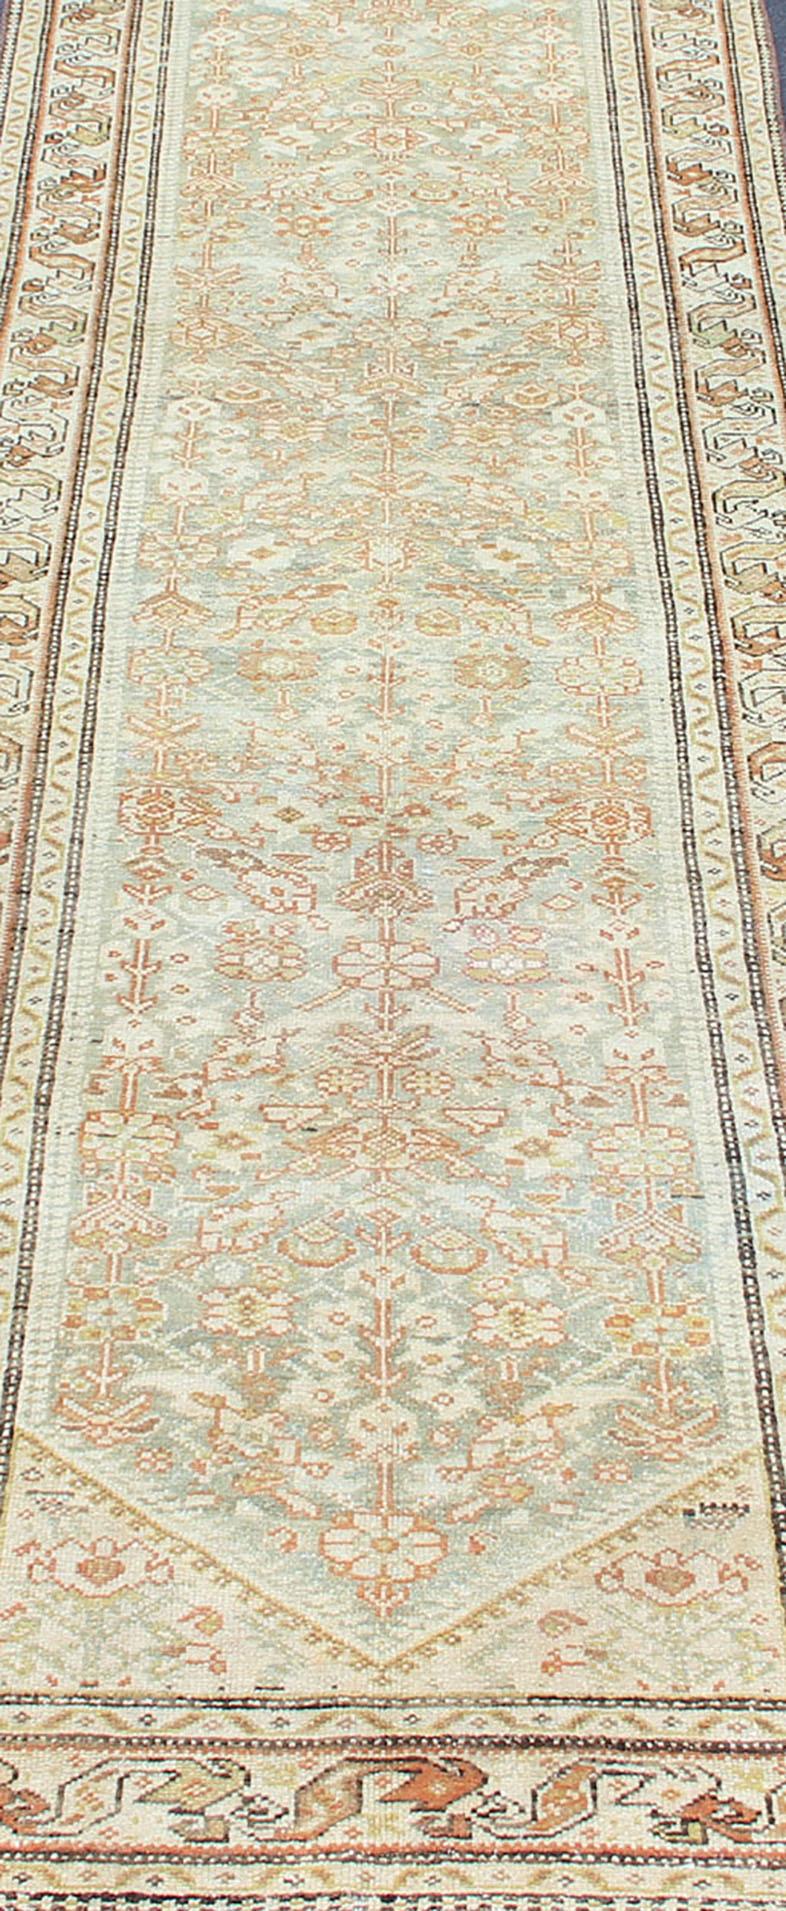 Antique Persian Malayer runner with geometric all-over design in light blue. Blue, coral and peach Malayer antique rug from Persia with geometric motifs, Keivan Woven Arts / rug SUS-2009-617 Country of origin / type: Iran / Malayer, circa